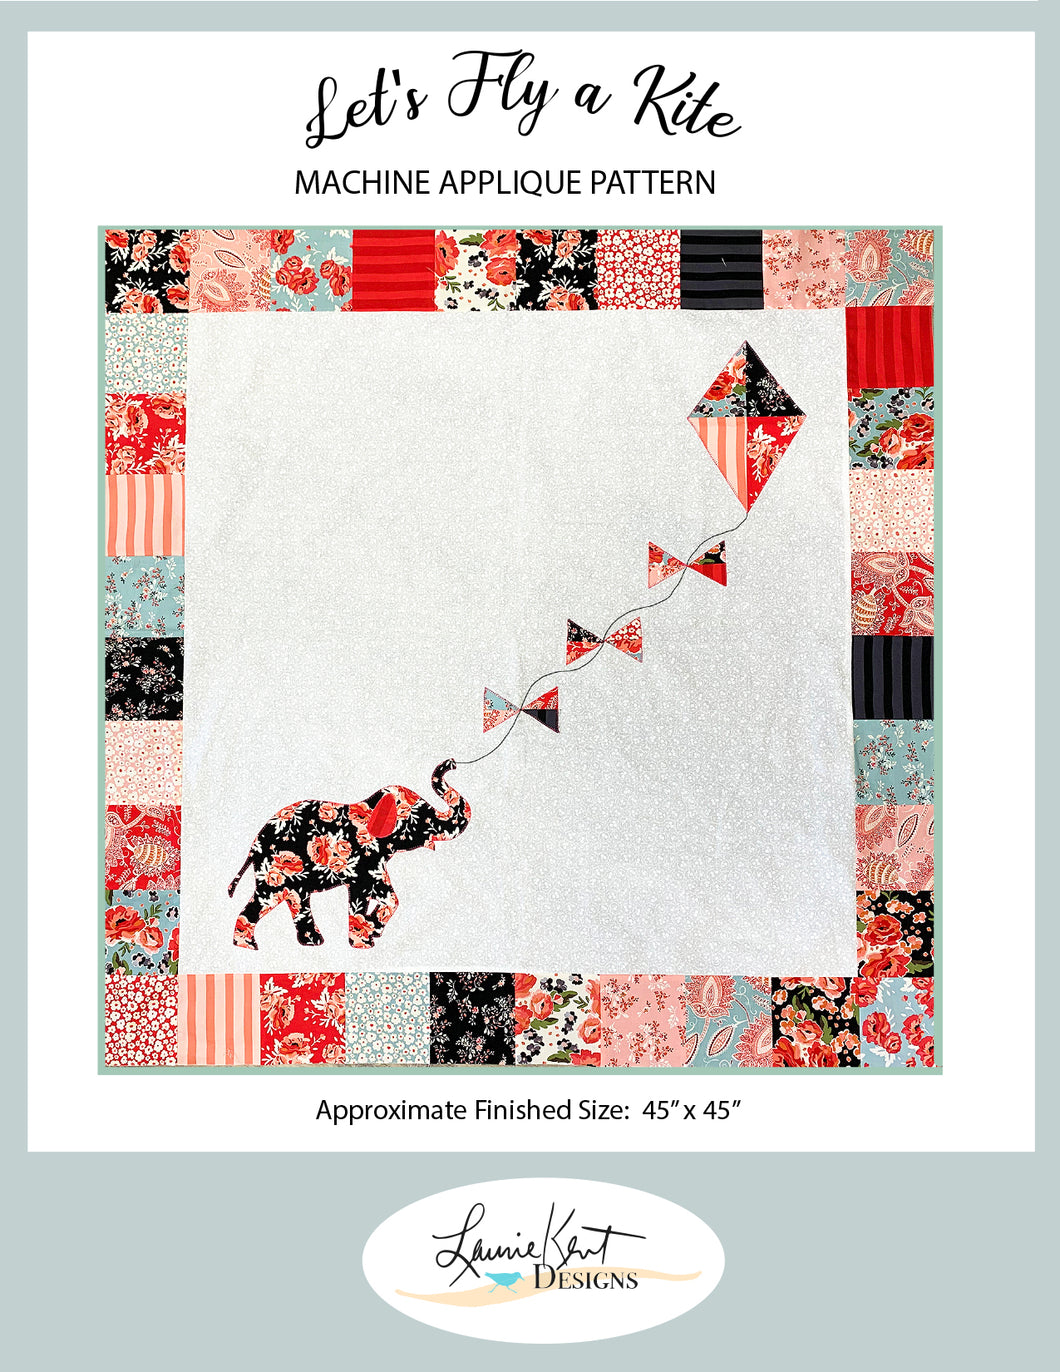 Let's Fly a Kite Applique Pattern